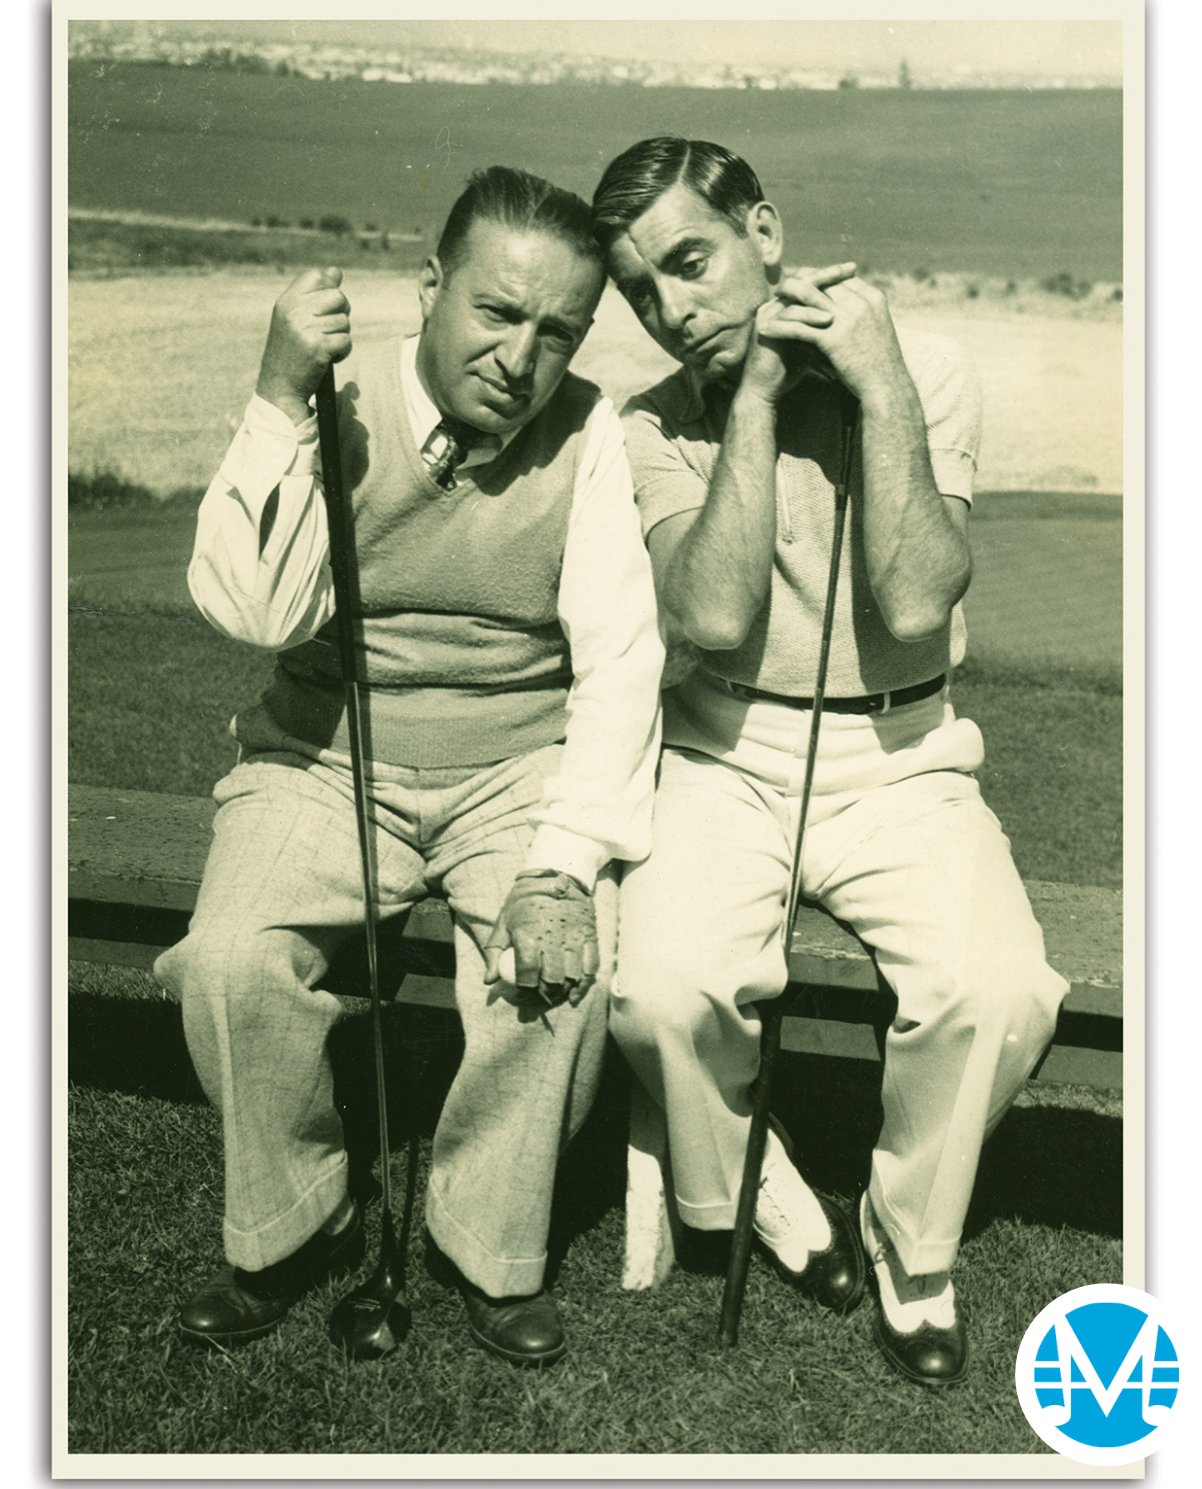 Gus Kahn and Eddit Canto pose with silly faces and hold golf clubs.